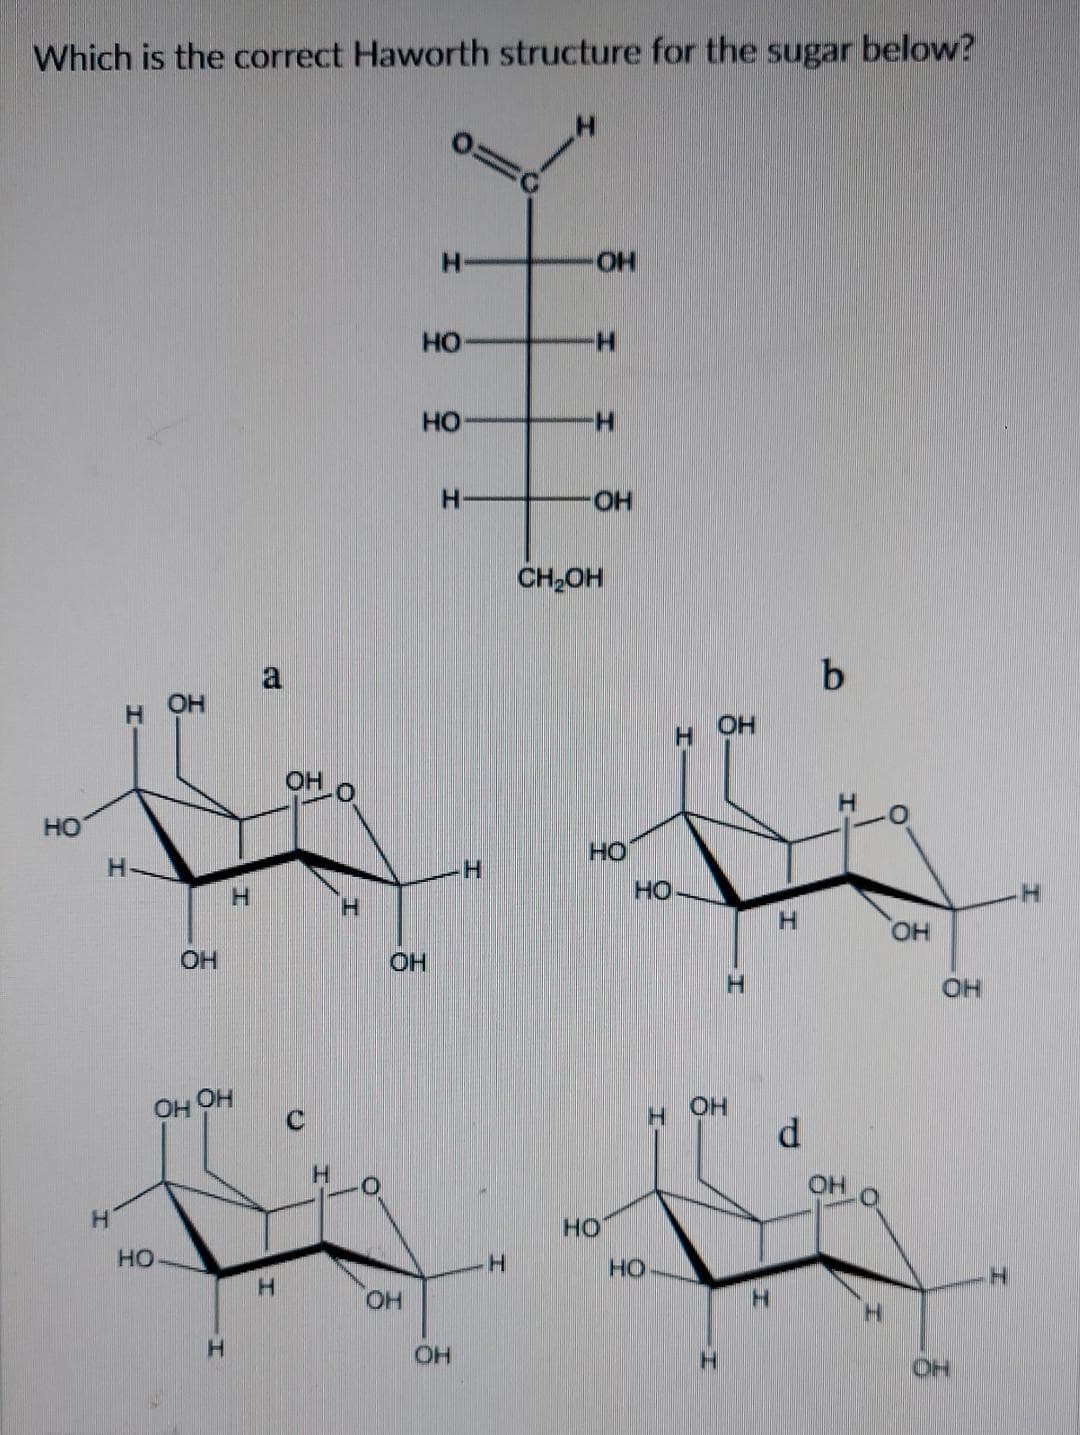 Which is the correct Haworth structure for the sugar below?
H
НО
НО
НО
H
I
Н-
НО
ОН
ОН
OH
H
ОН
ОН
-0
C
H
Н
OH
OH
H
OH
Н
H
OH
н
H
-OH
CH₂OH
HO
HO
HO
HO
H
ОН
OH
Н
d
b
Н
OH
H
О
OH
он
OH
H
н